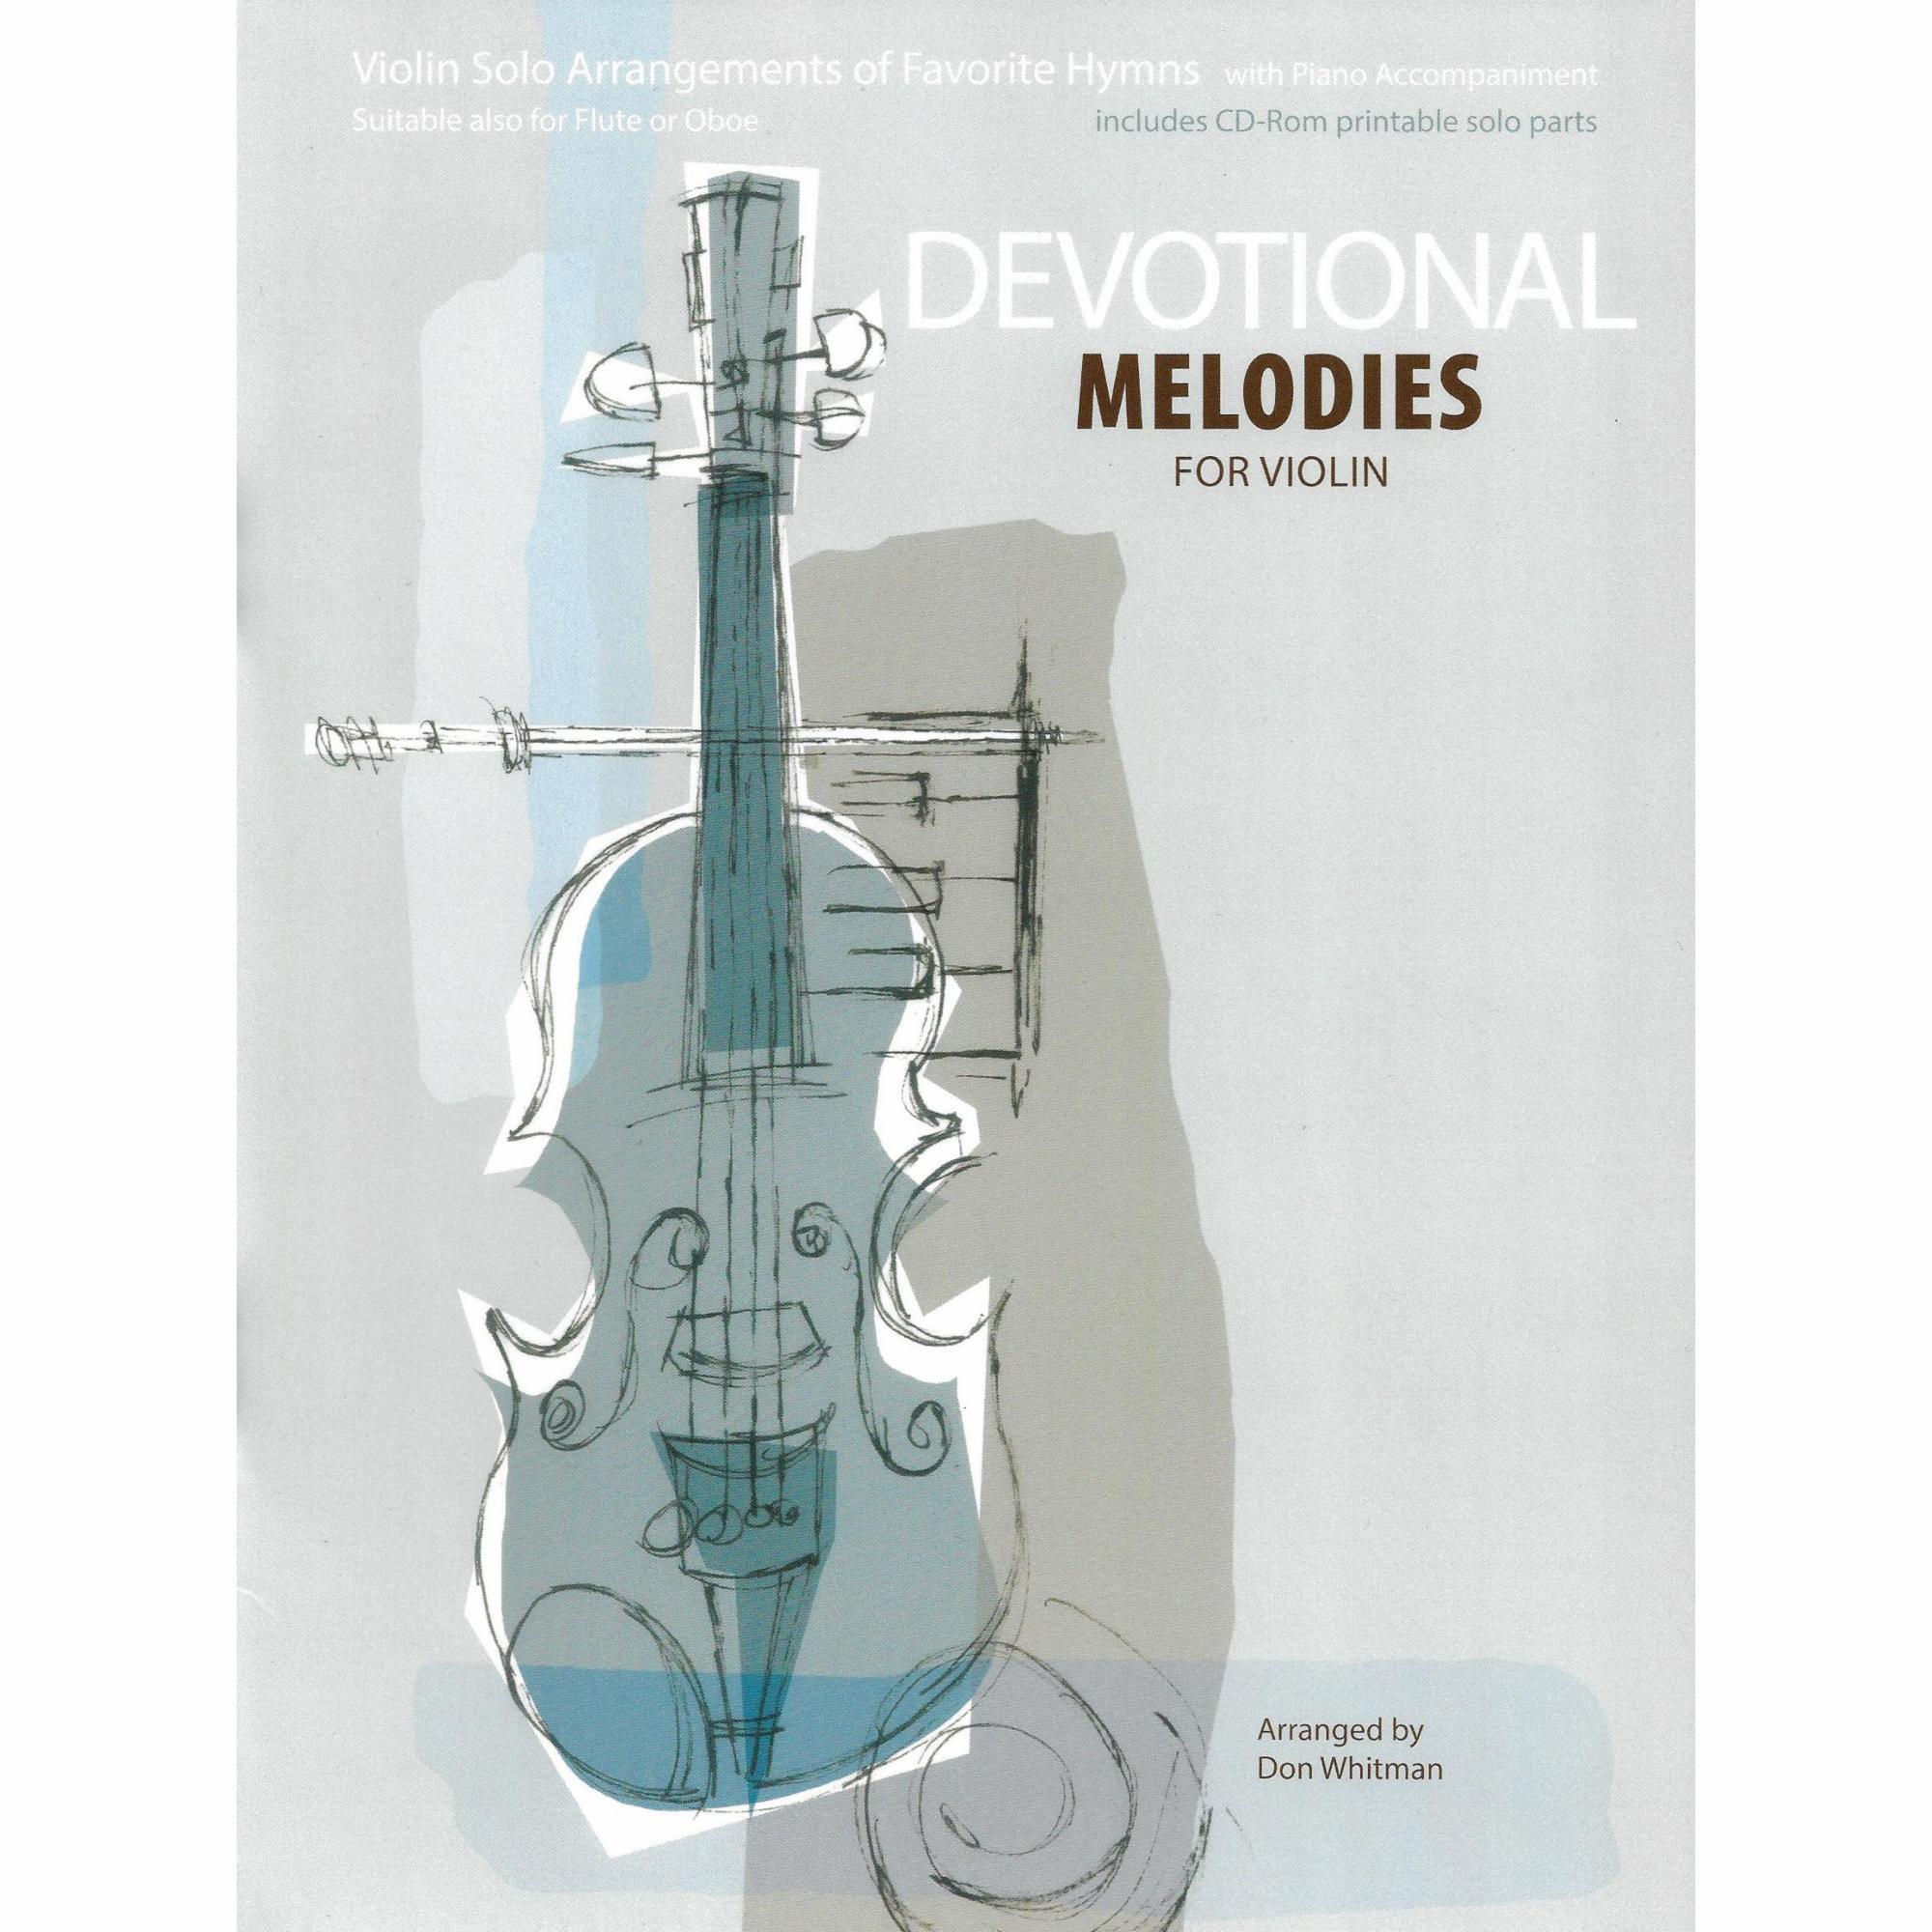 Devotional Melodies for Violin and Piano